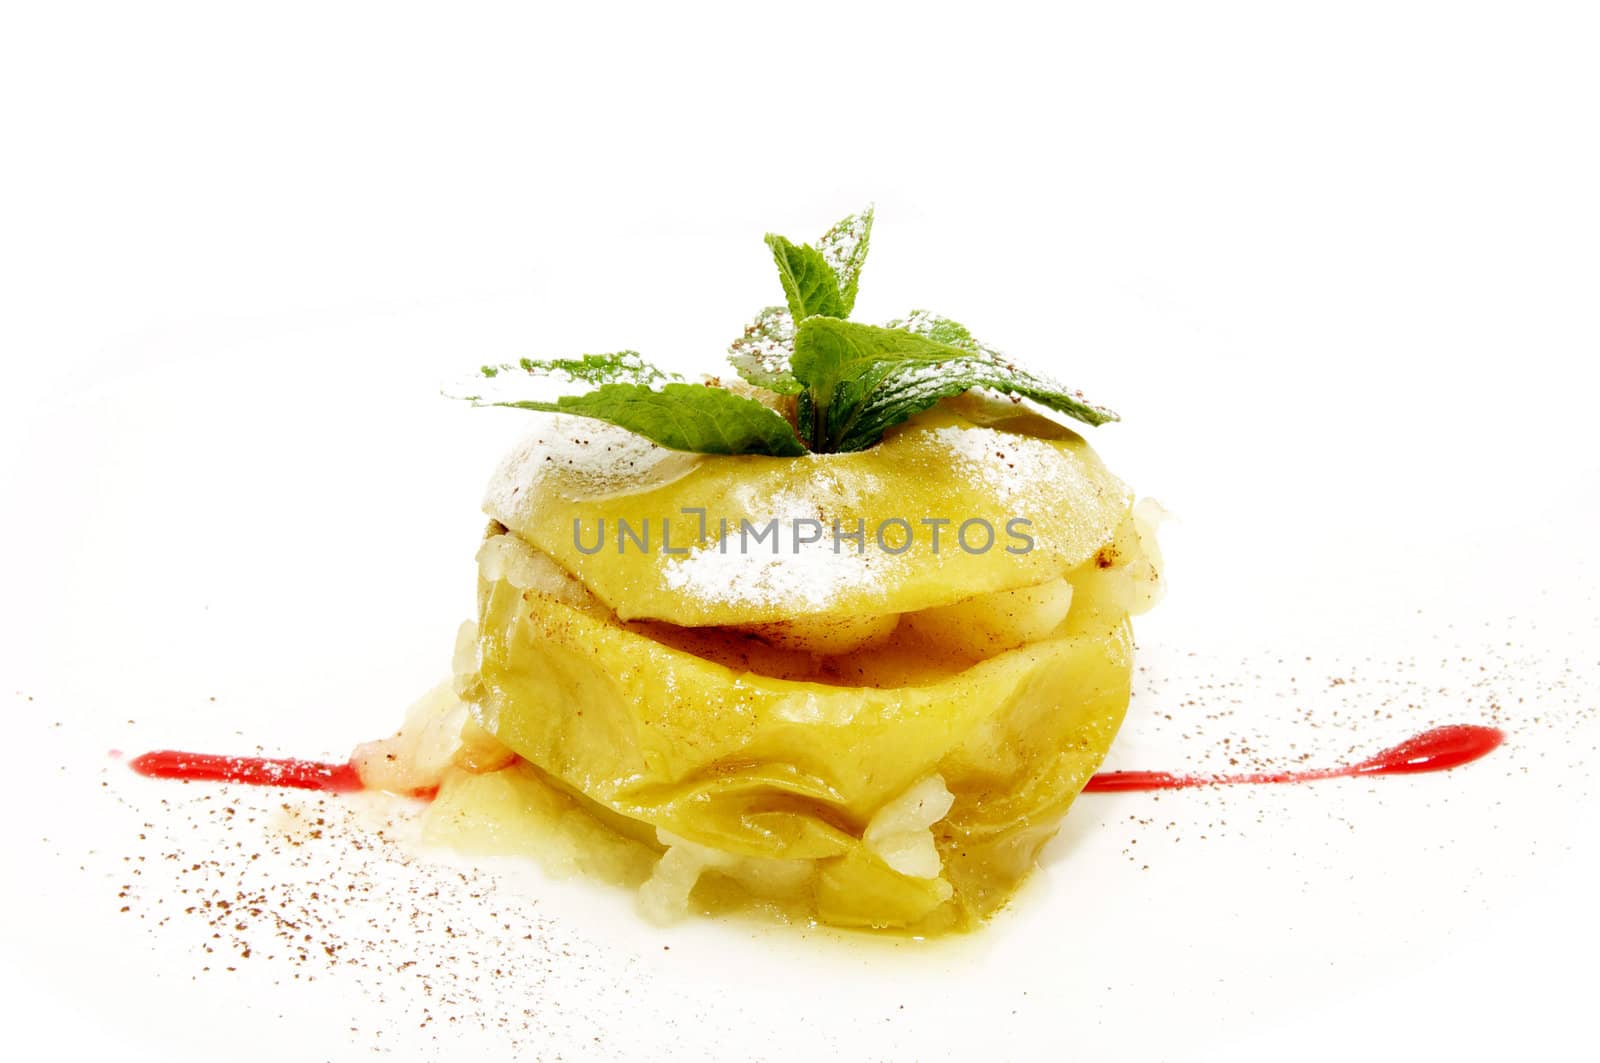 Baked apple decorated with mint on a white plate